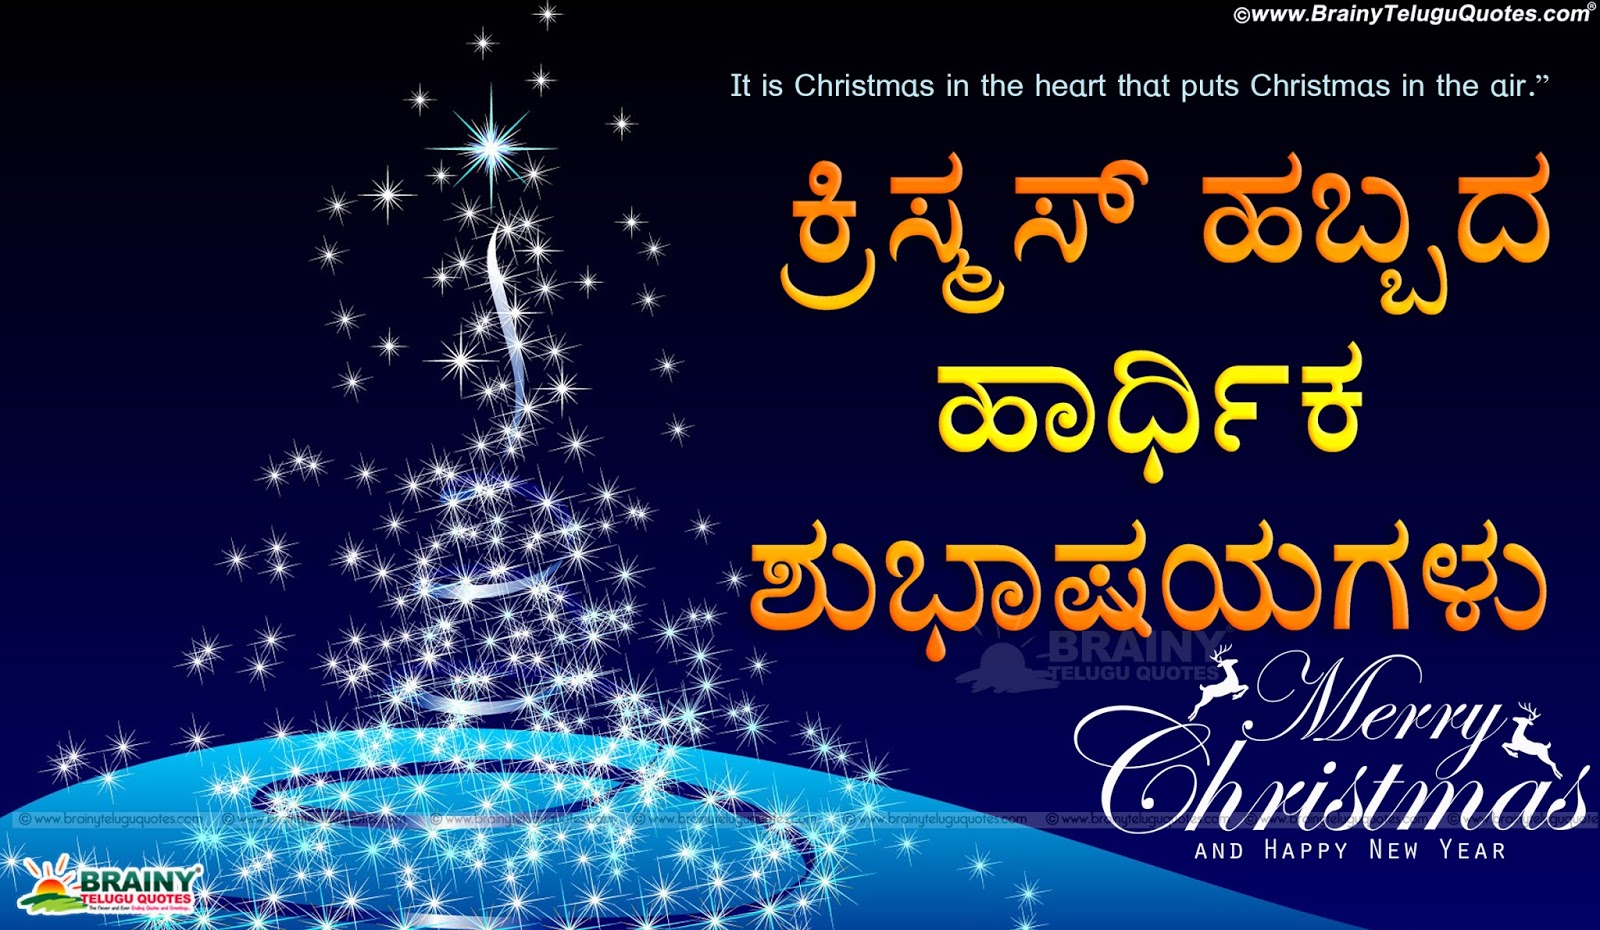 Christmas Quotes Wallpapers in KannadaChristmas Kannada Greetings